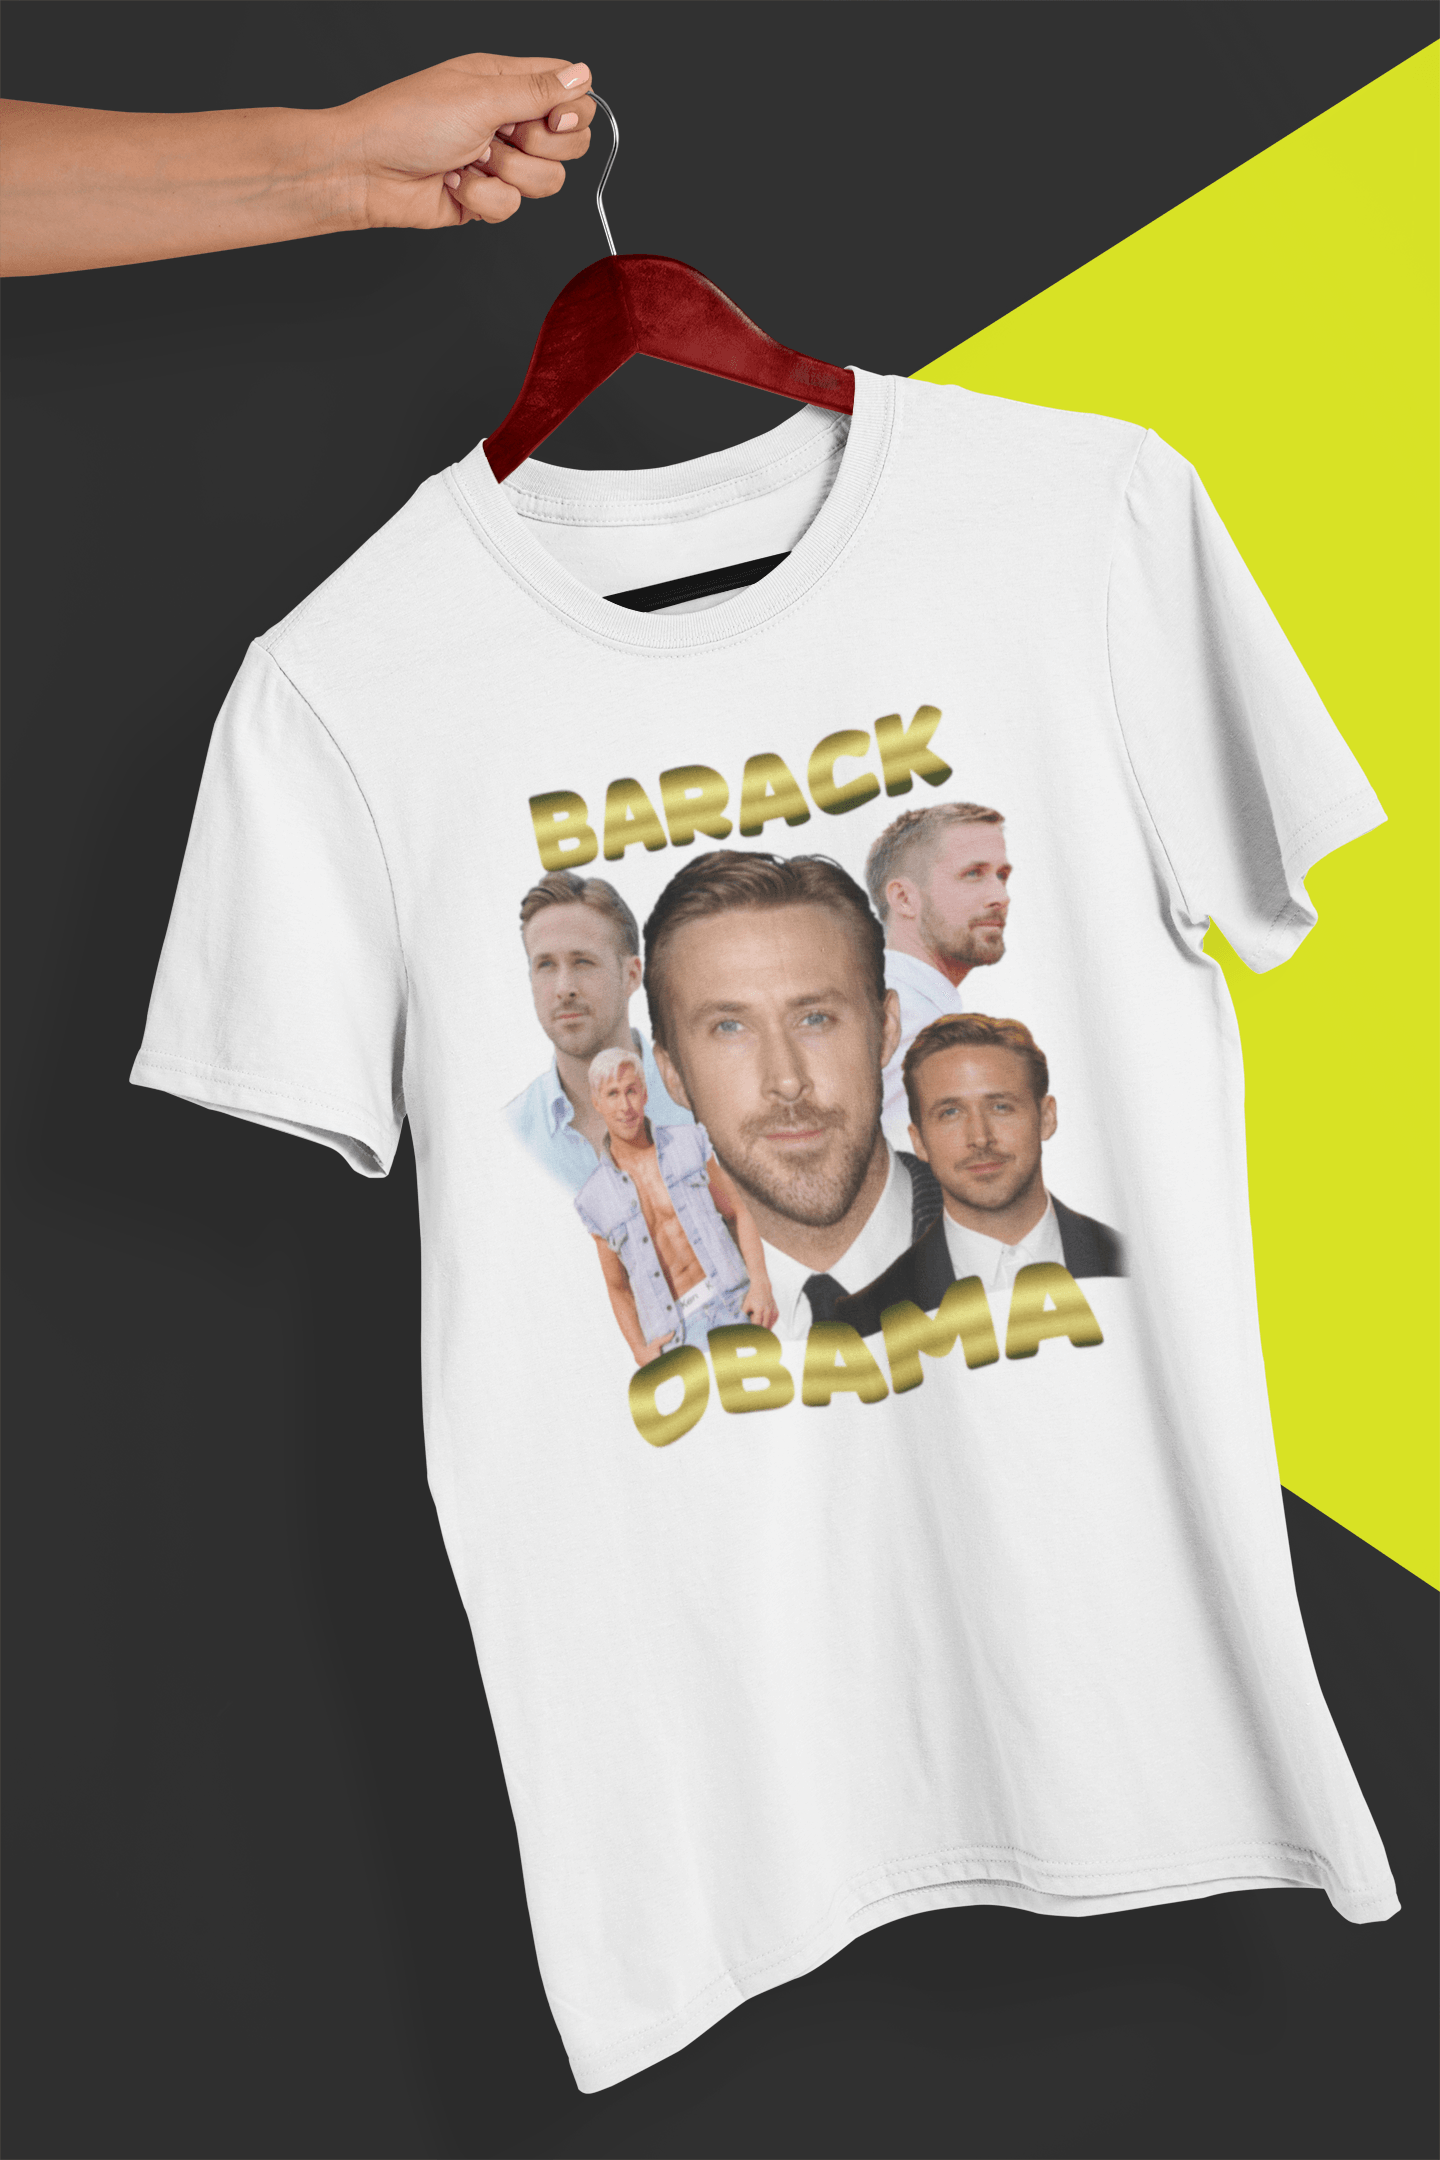 A white T-shirt with the actor Ryan Gosling written &quot;Barack Obama&quot;. is hung on a red hanger, held by a hand against a split black and yellow background.